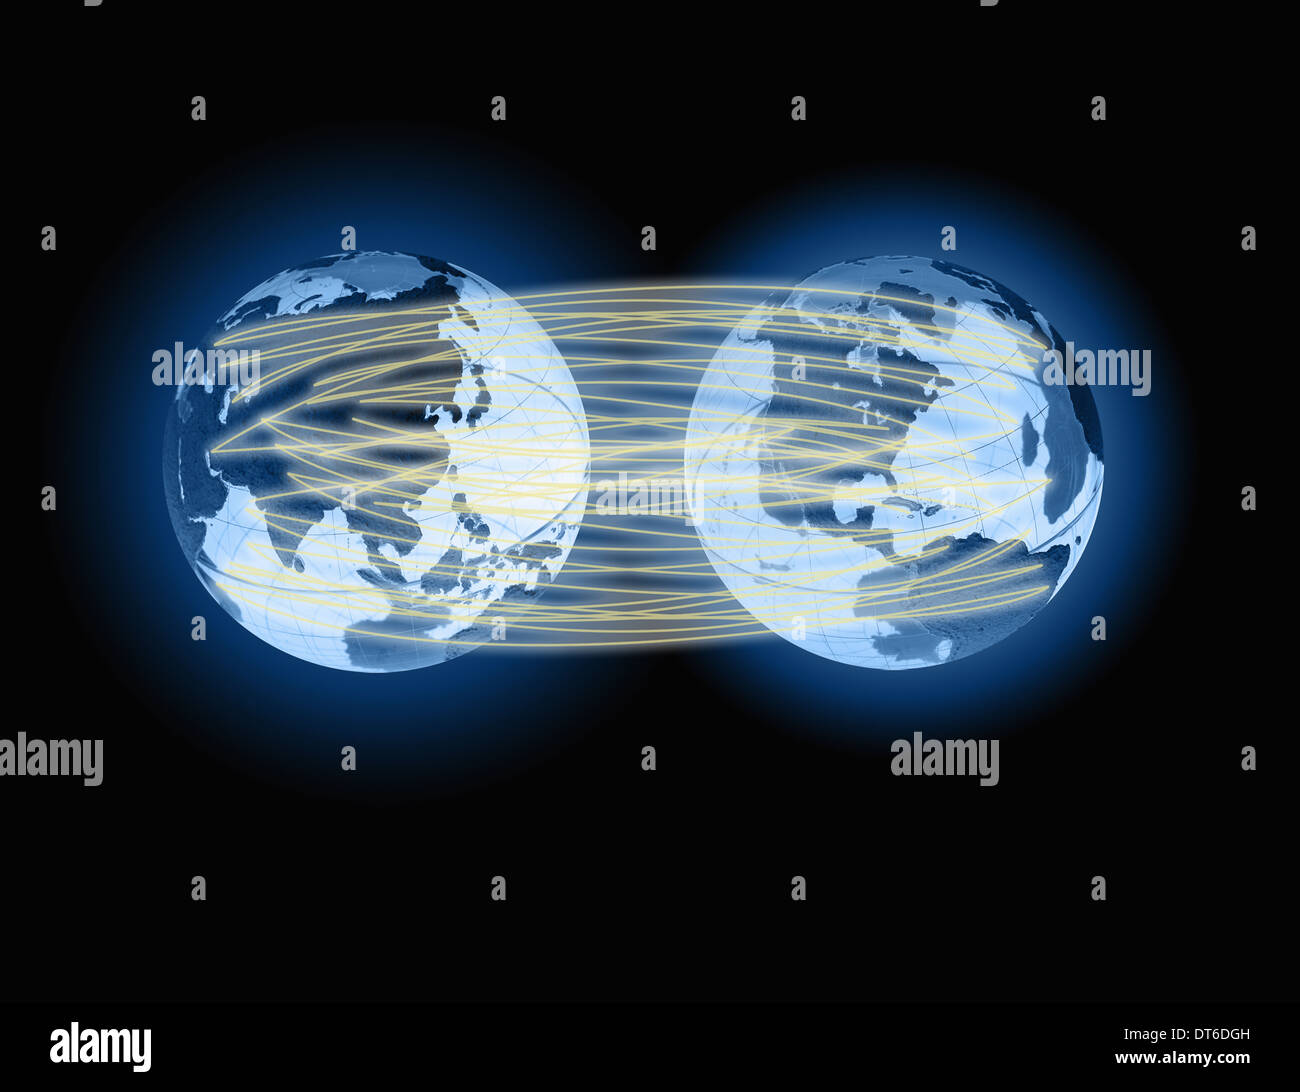 Two globes linked by lines of light, representing global communication. Stock Photo